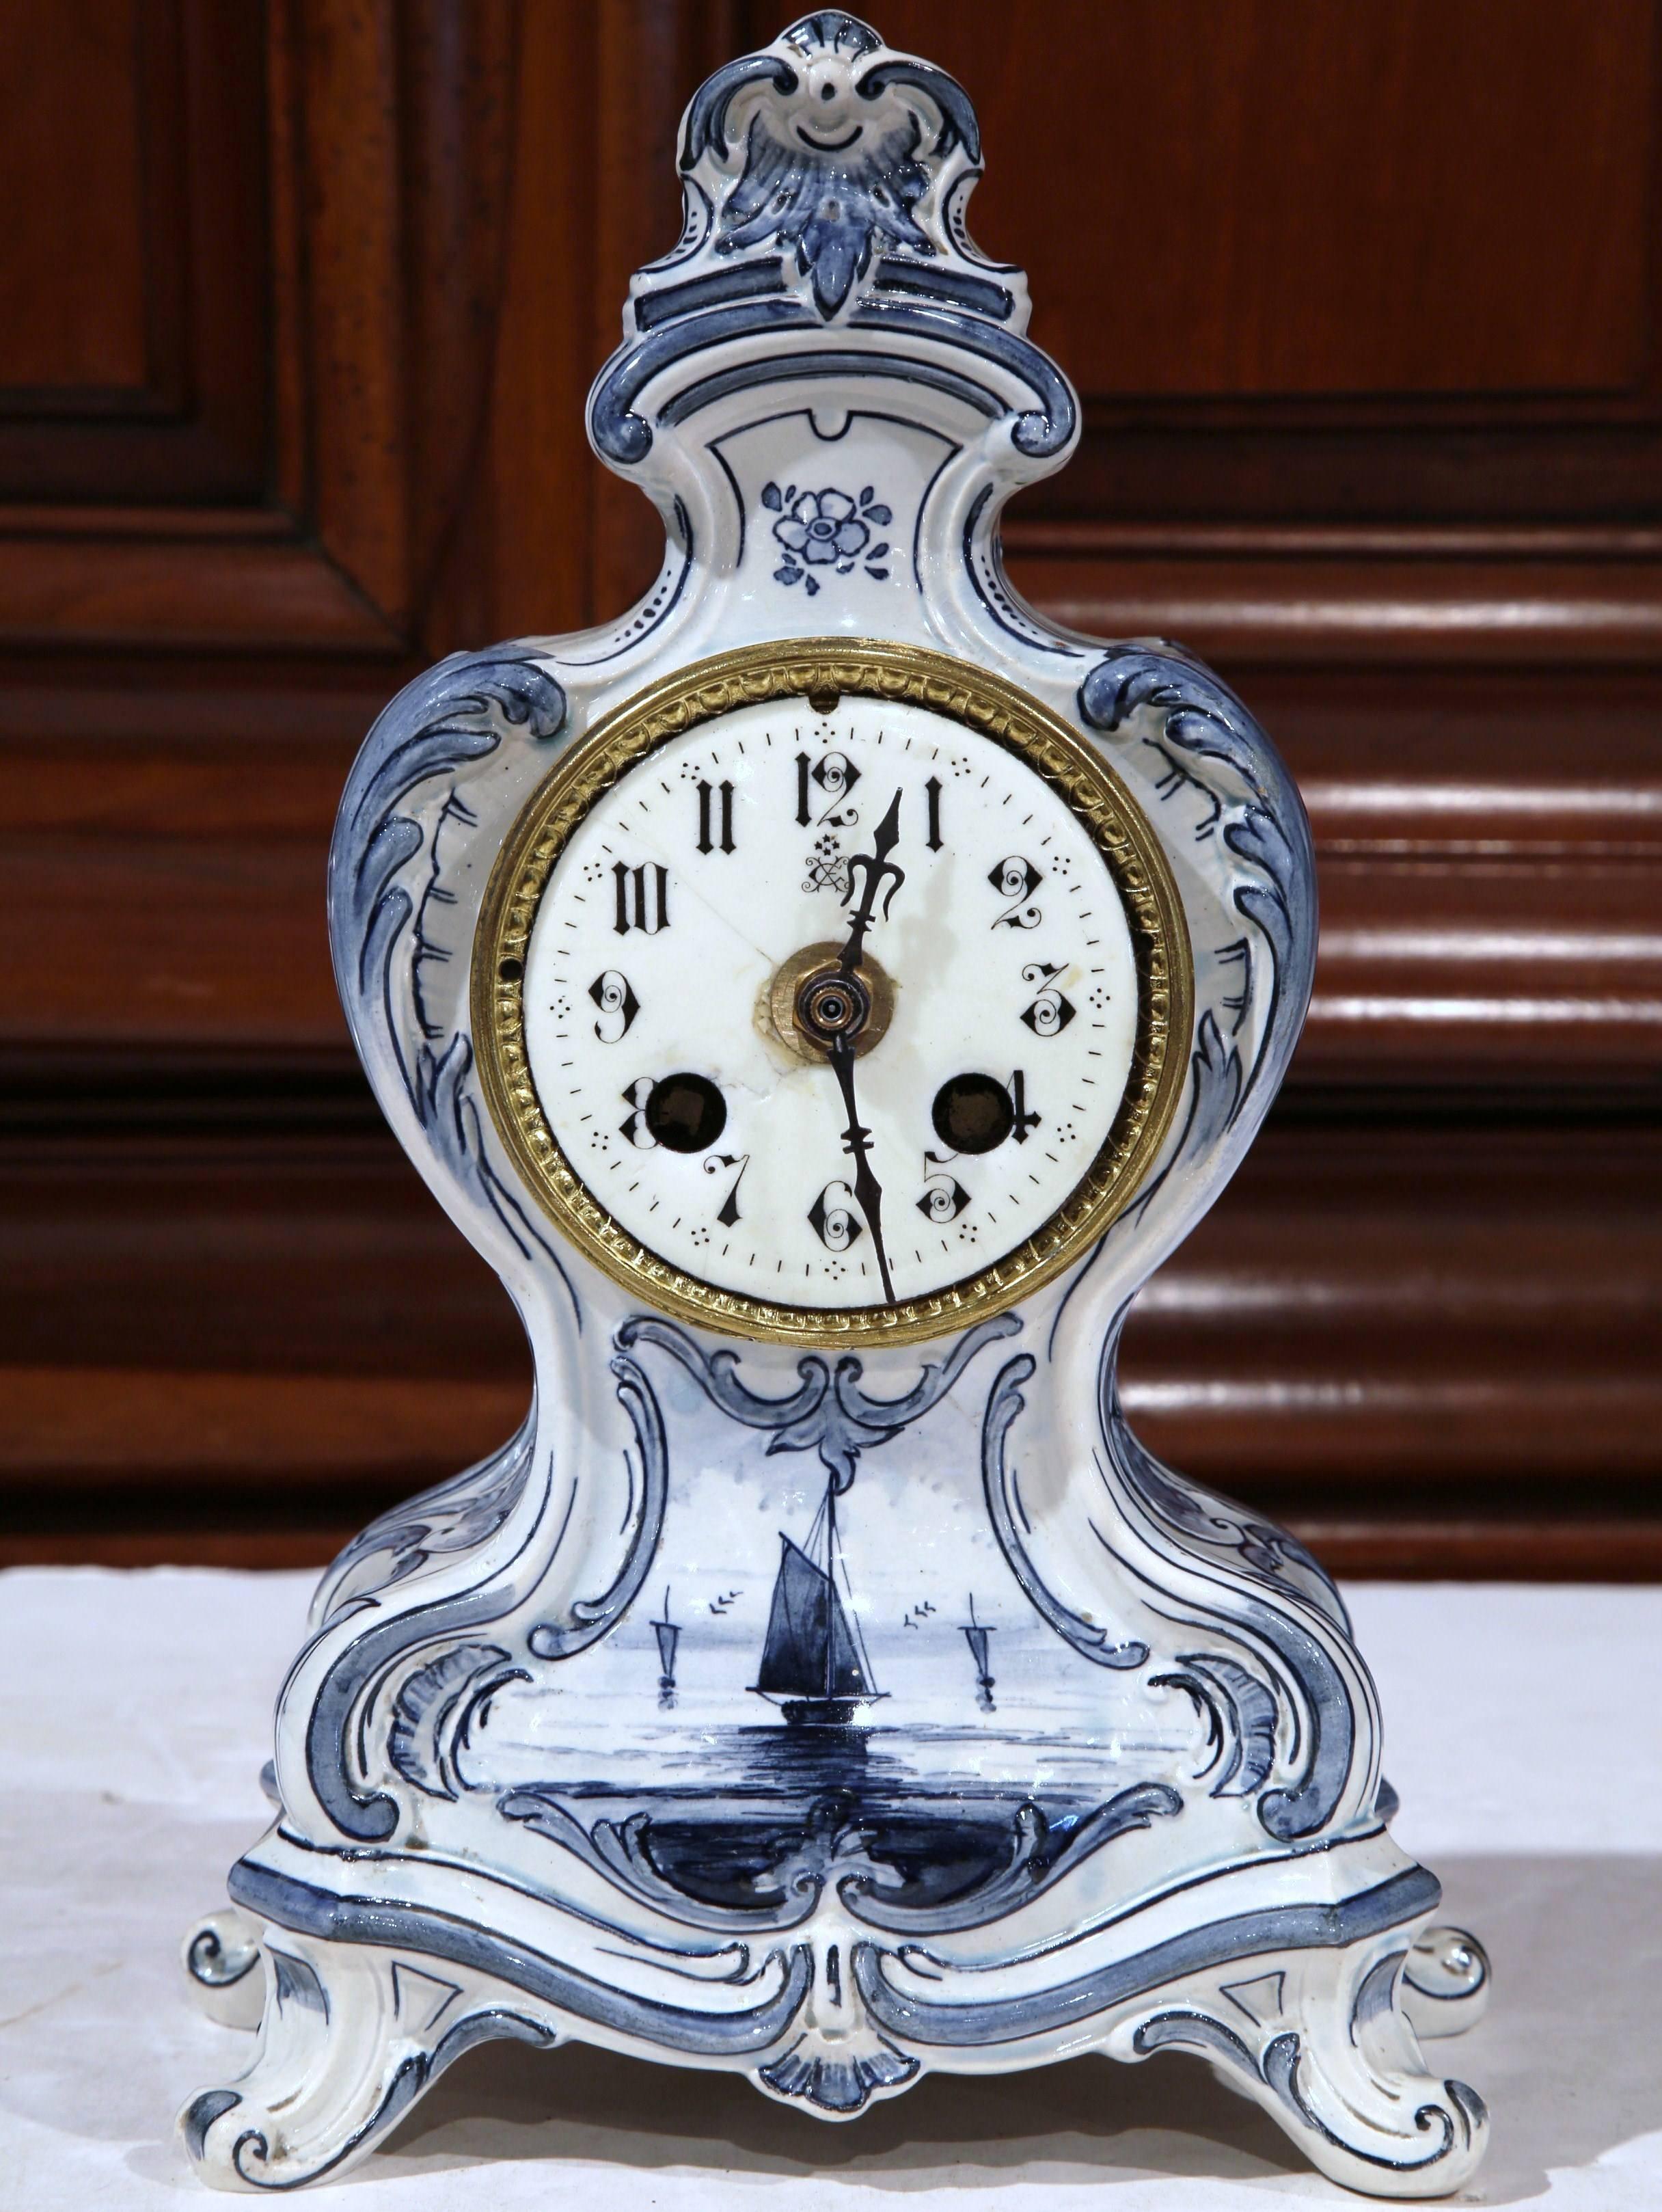 Keep time on your mantel or desktop with this small, elegant clock from Paris, France, circa 1870. The blue and white delft table clock has a porcelain face, a battery operated movement (the original movement was in really bad condition), and